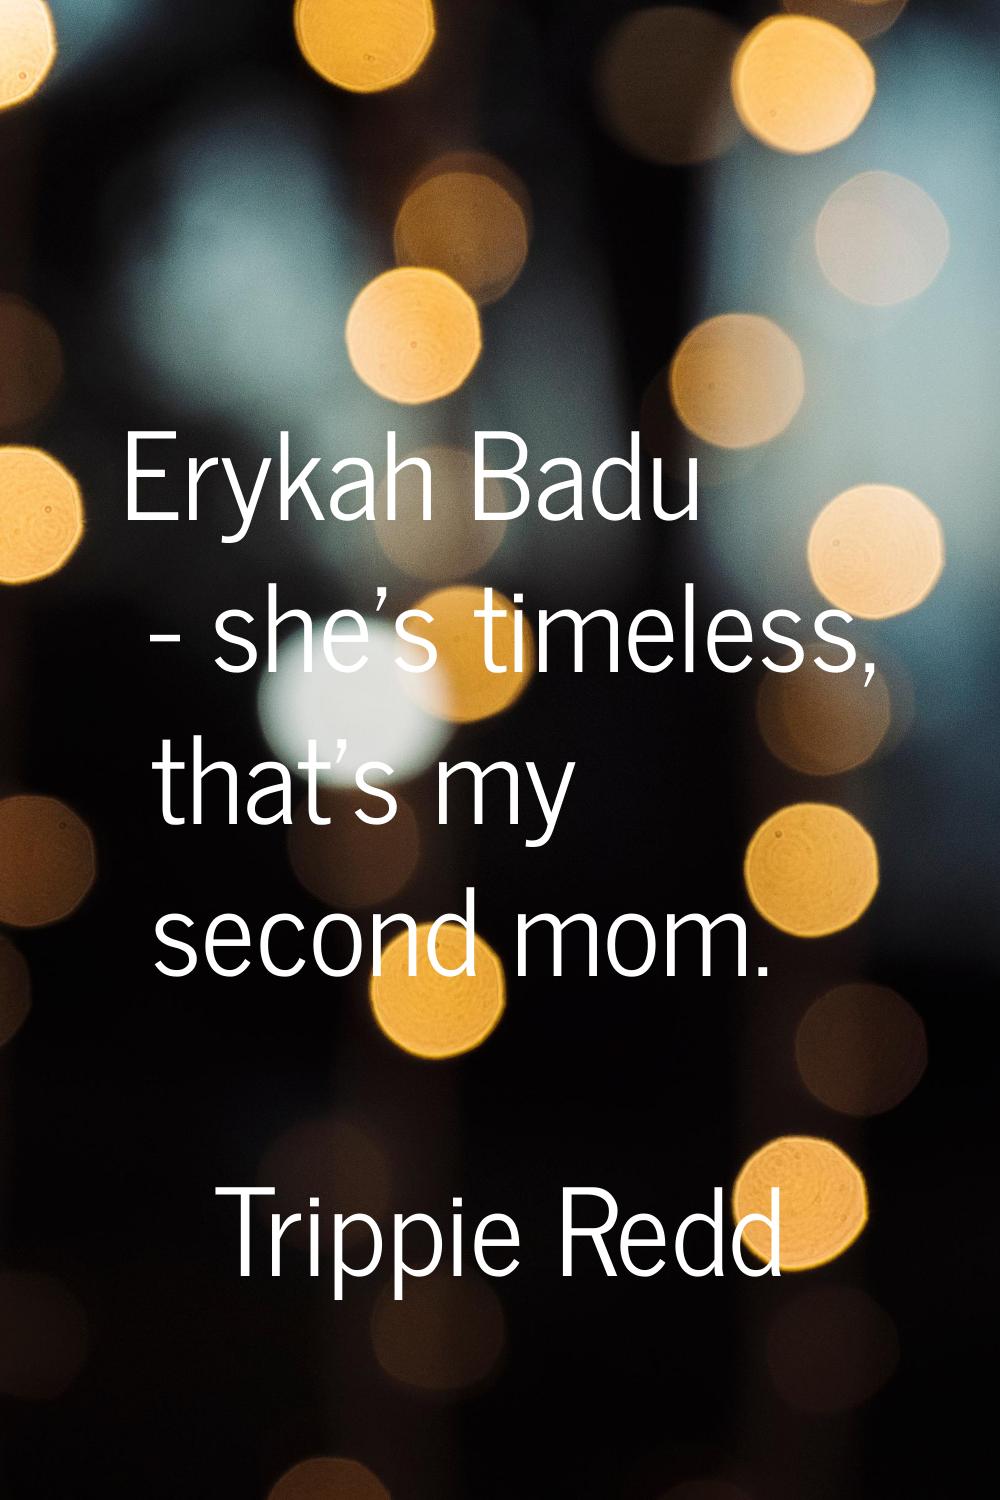 Erykah Badu - she's timeless, that's my second mom.